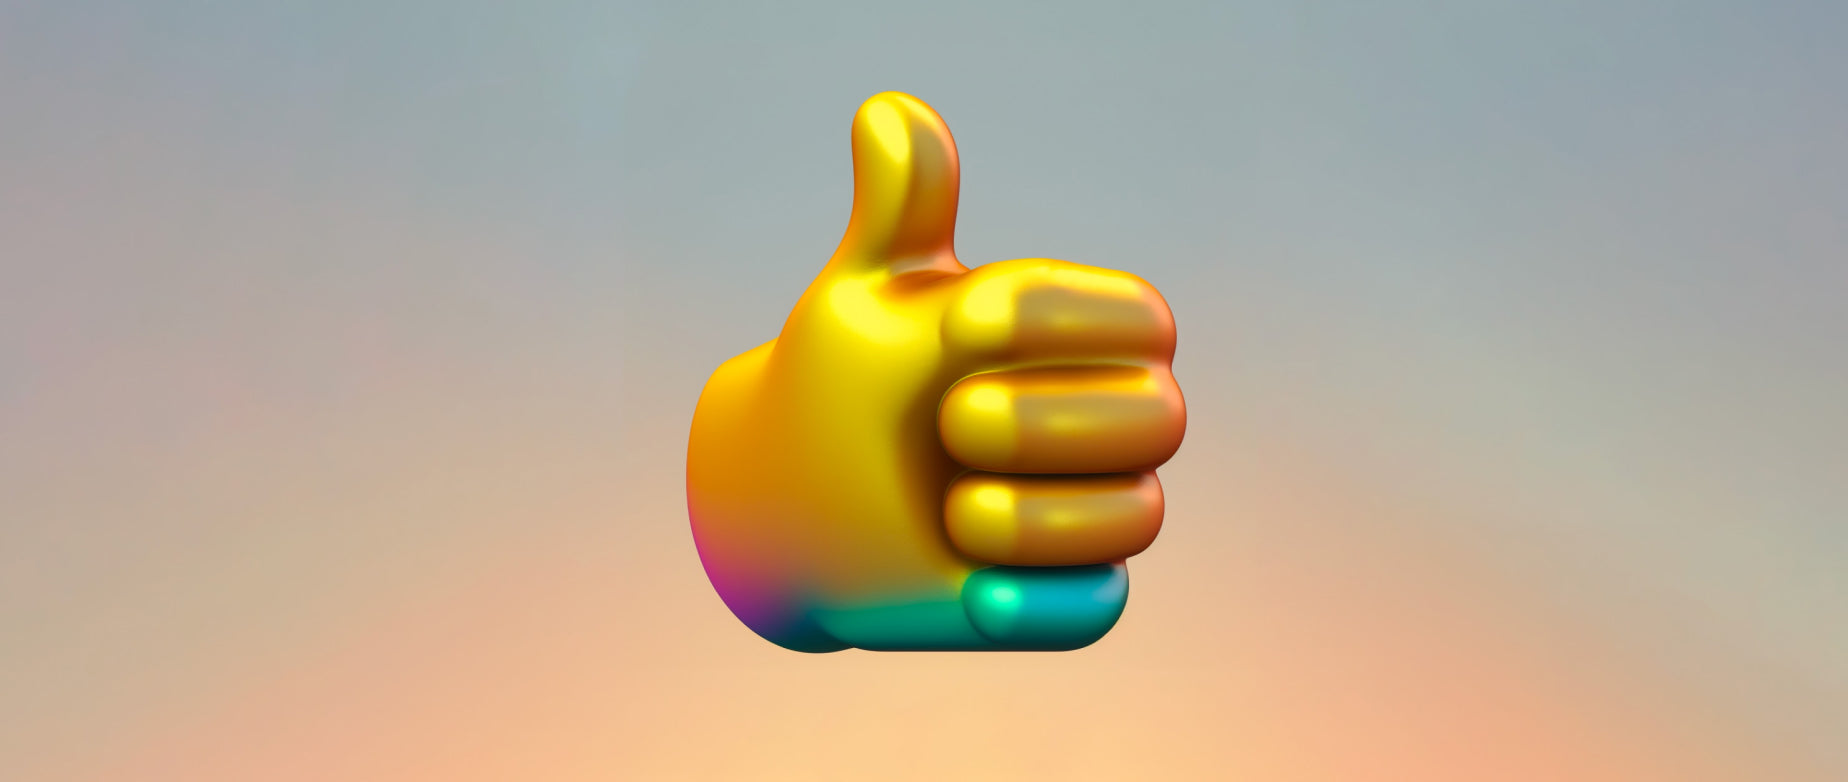 A metallic graphic 3D thumbs up emoji floats like a balloon against a gradient